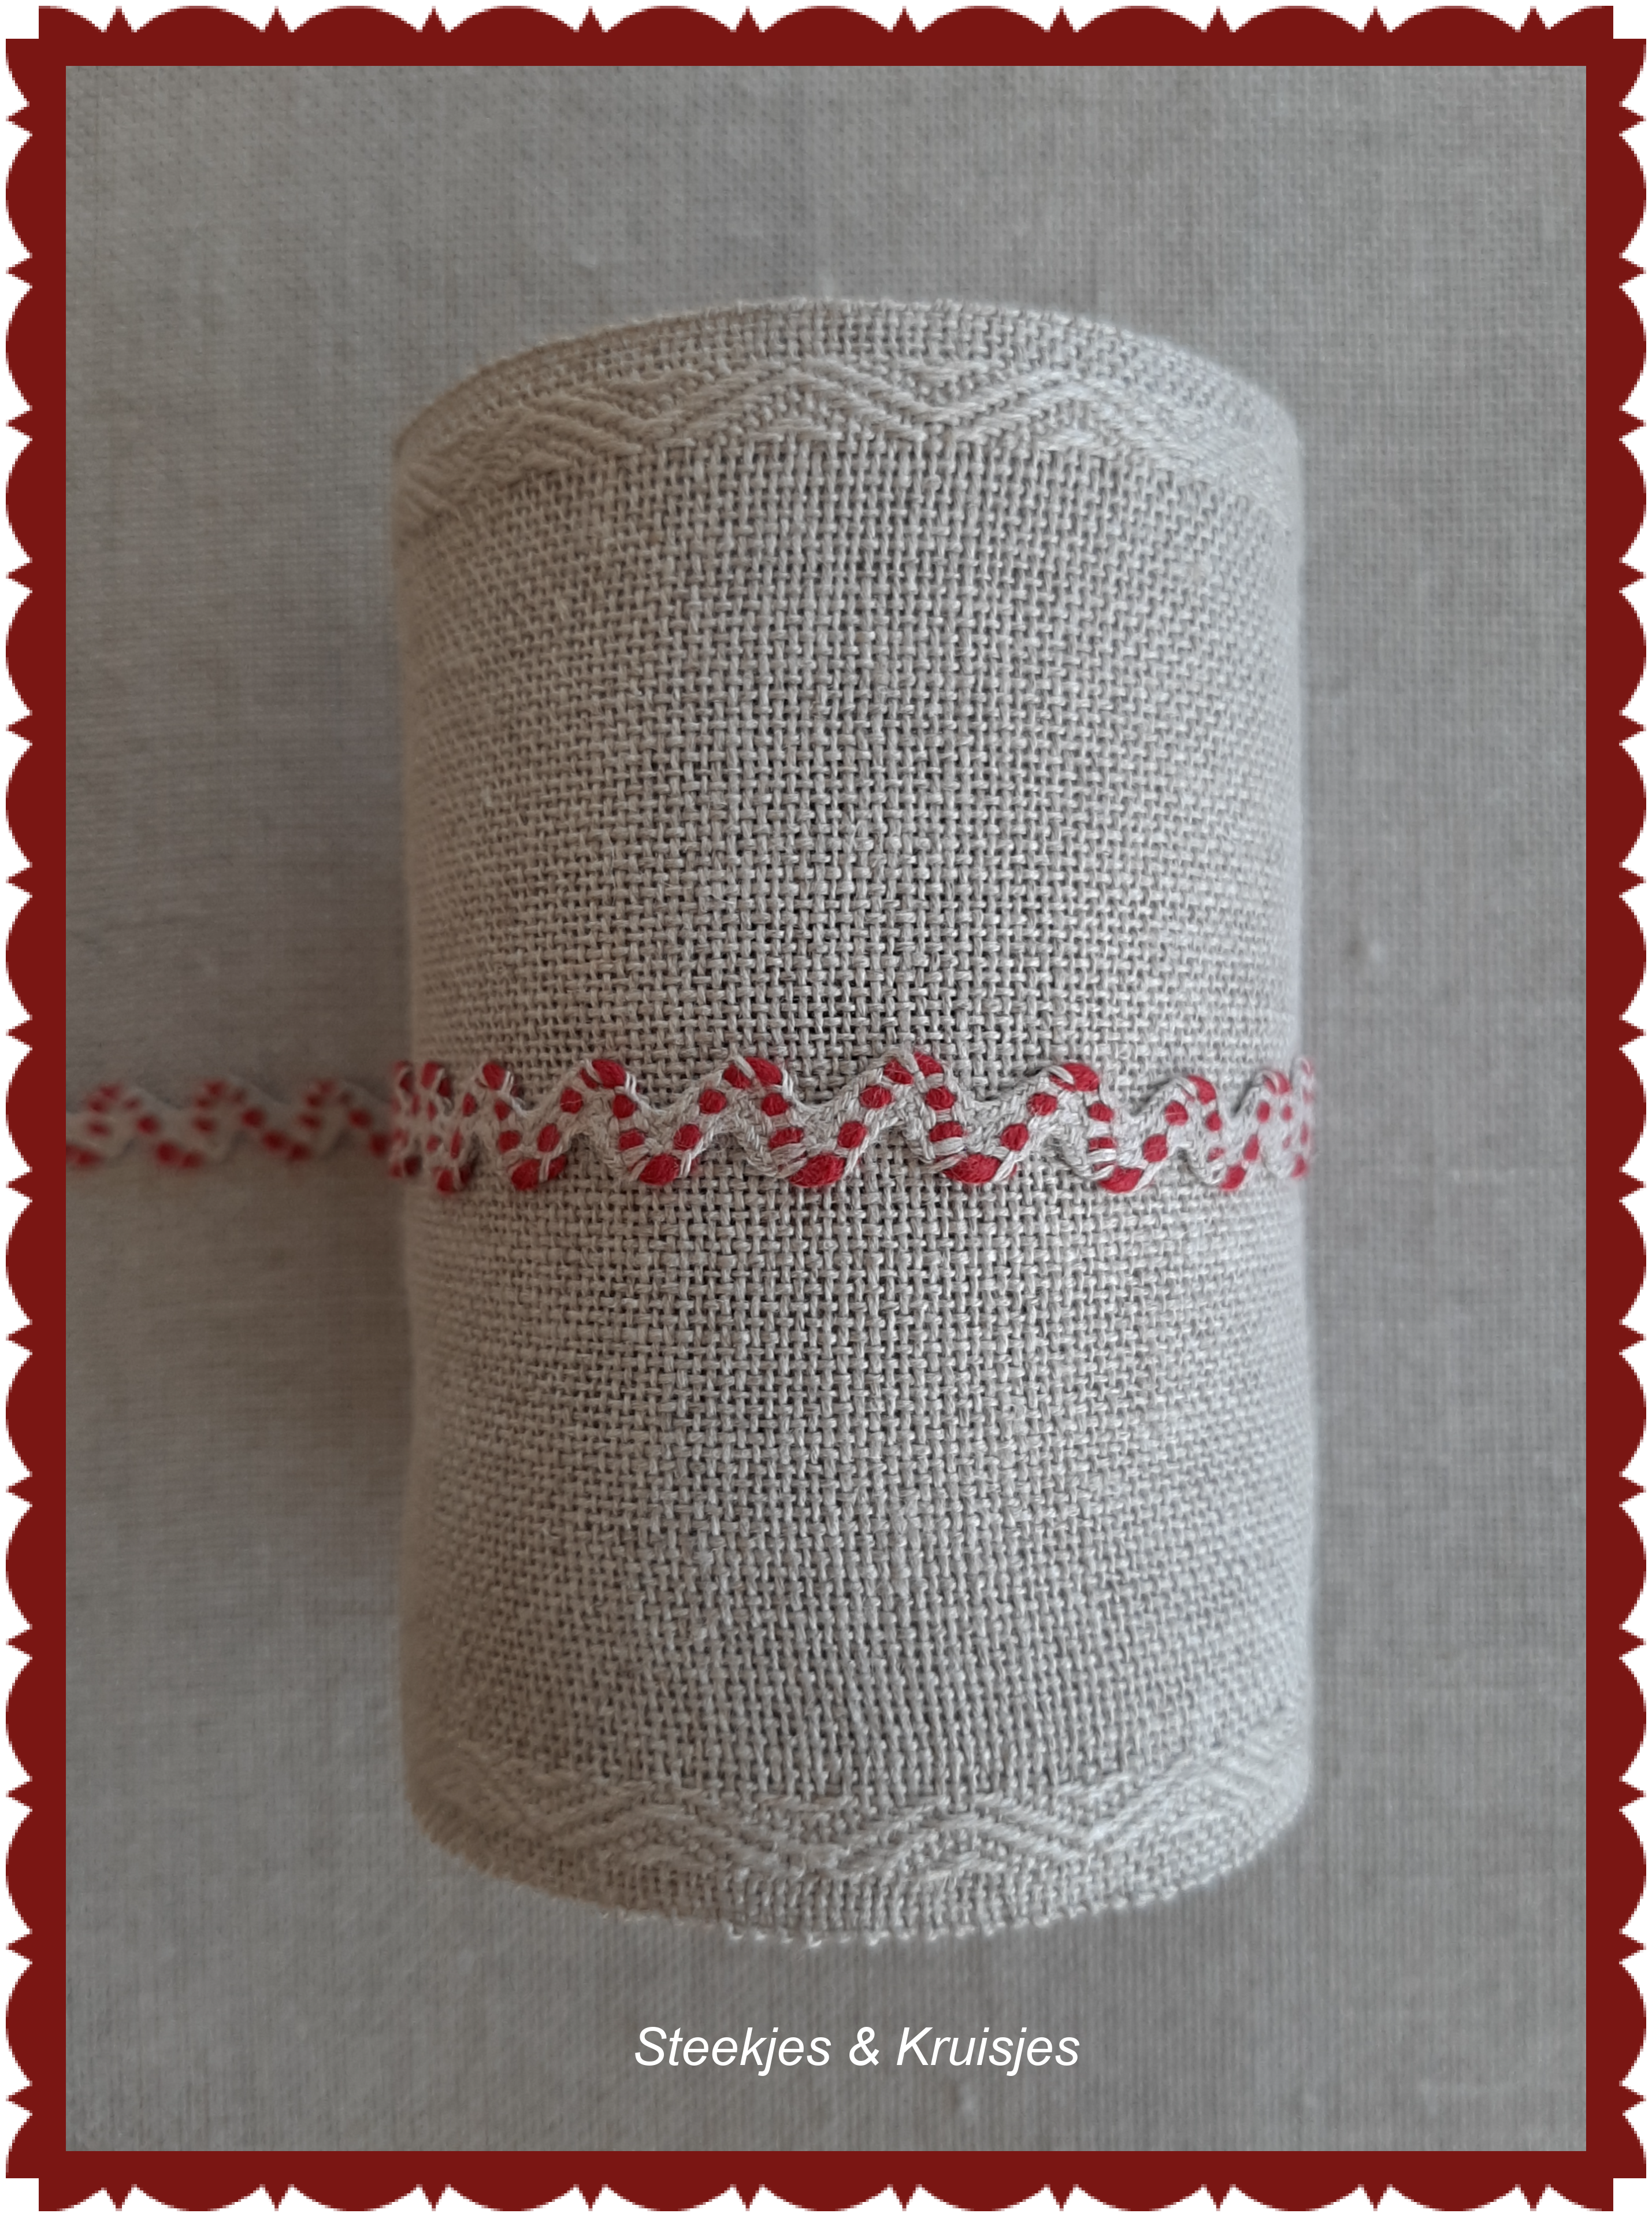 Natural serpentine ribbon with red center motif.